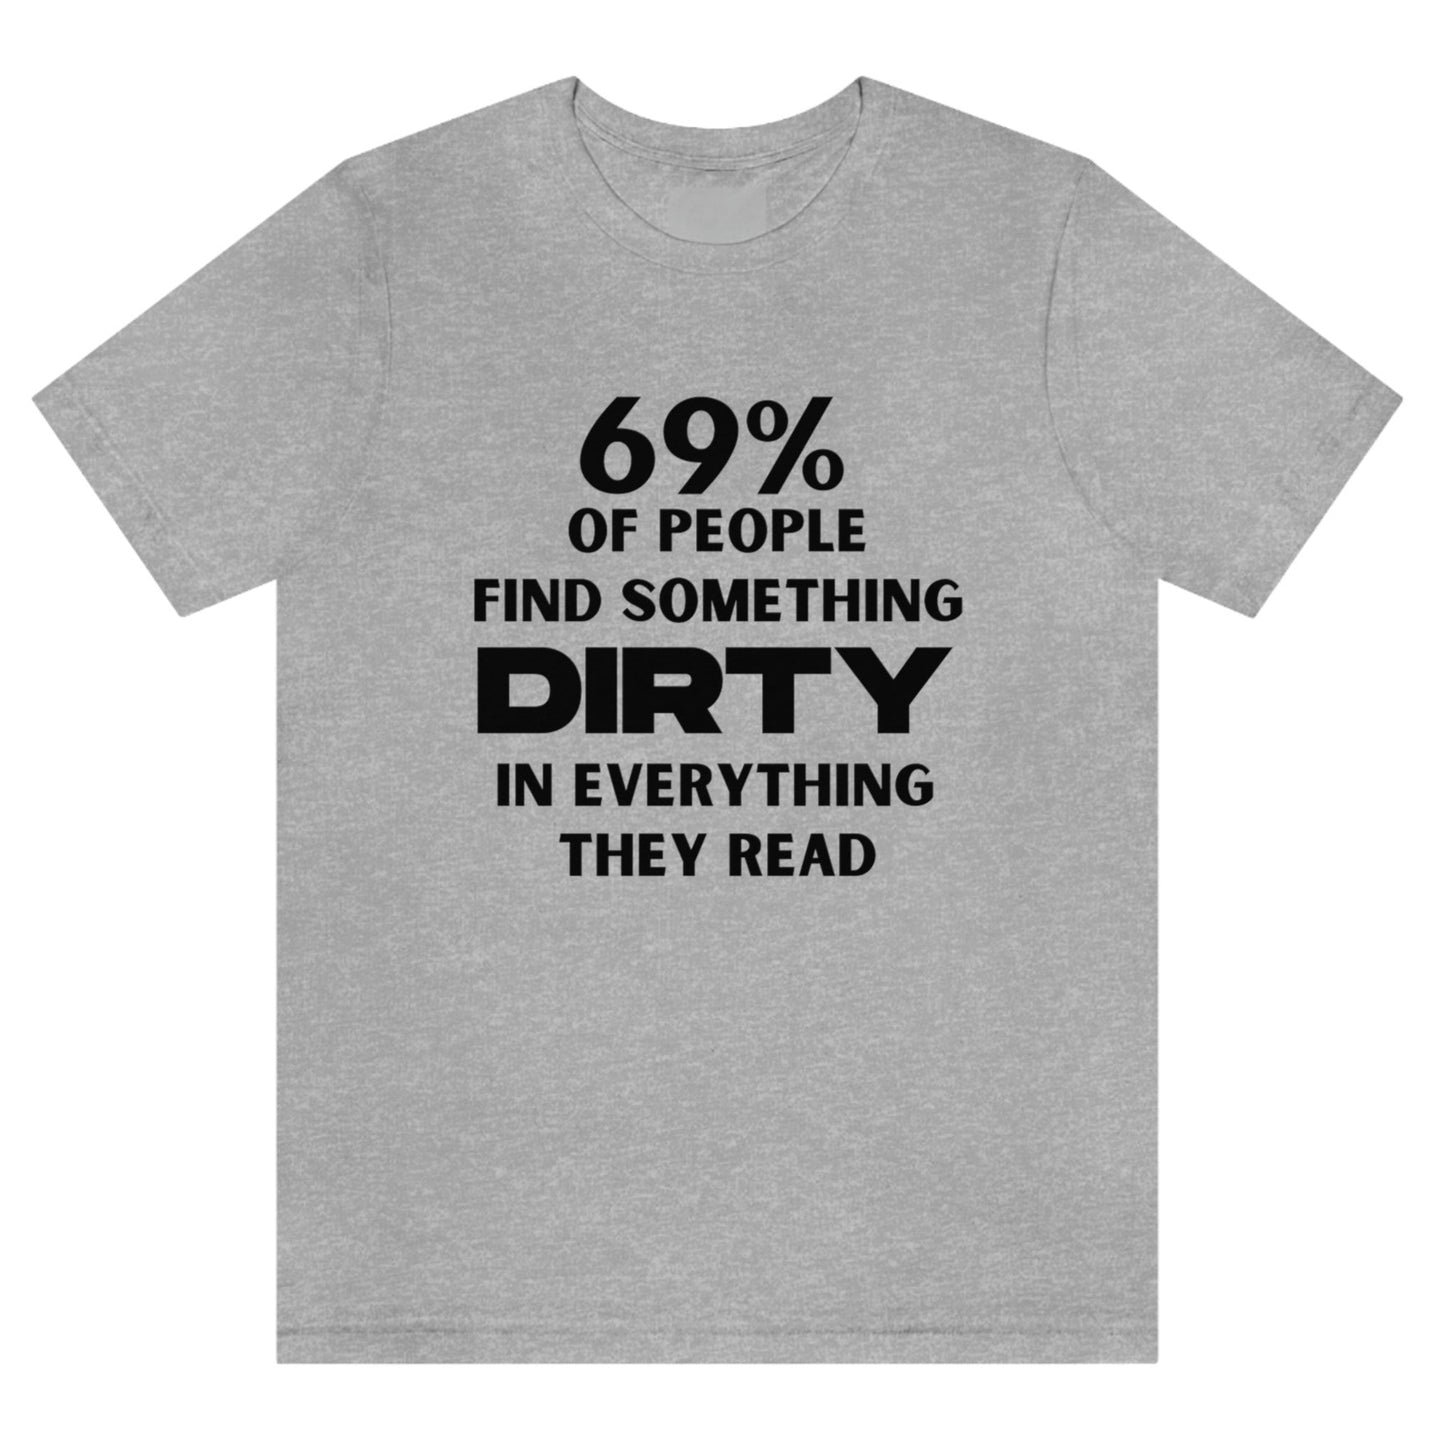 69-percent-of-people-find-something-dirty-in-everything-they-read-athletic-heather-t-shirt-unisex-funny